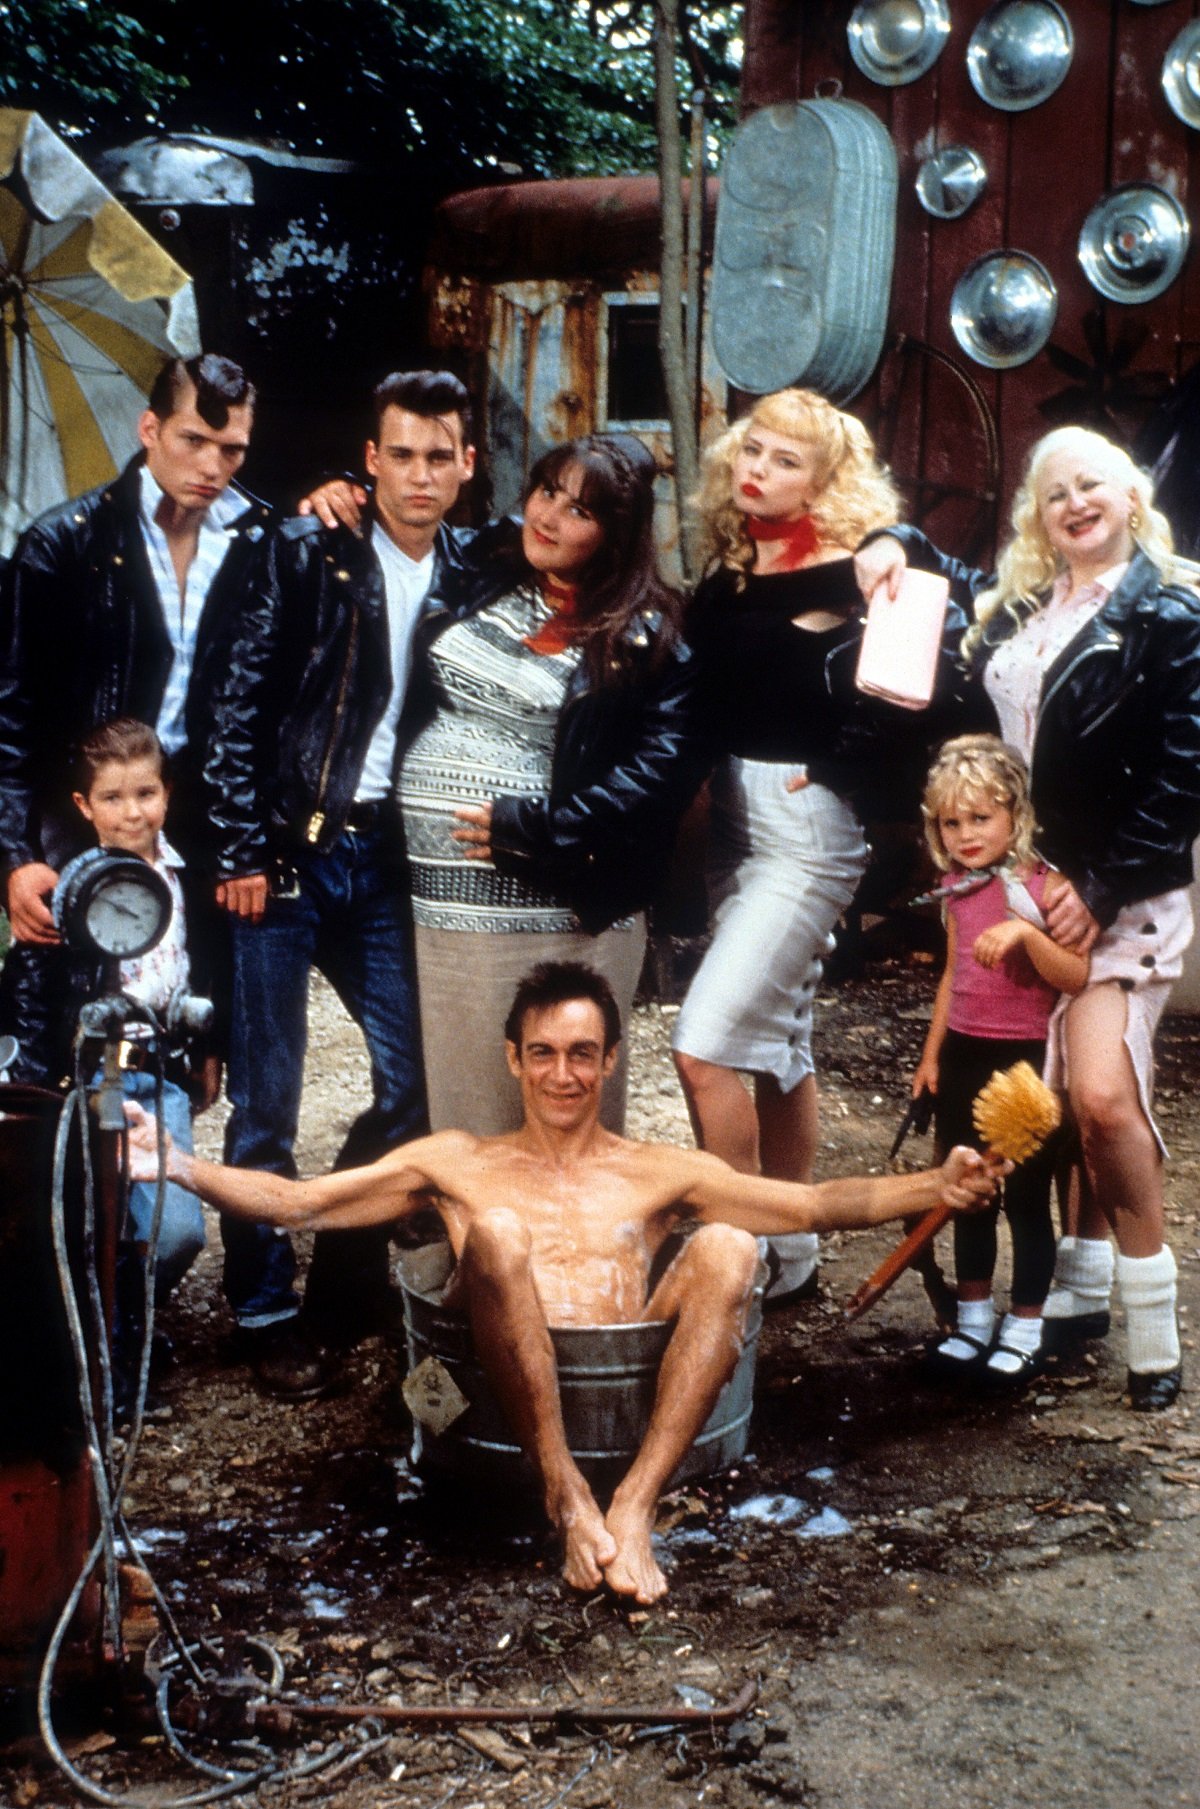 Johnny Depp, Traci Lords, Ricki Lake, and the rest of the cast of 'Cry-Baby' 